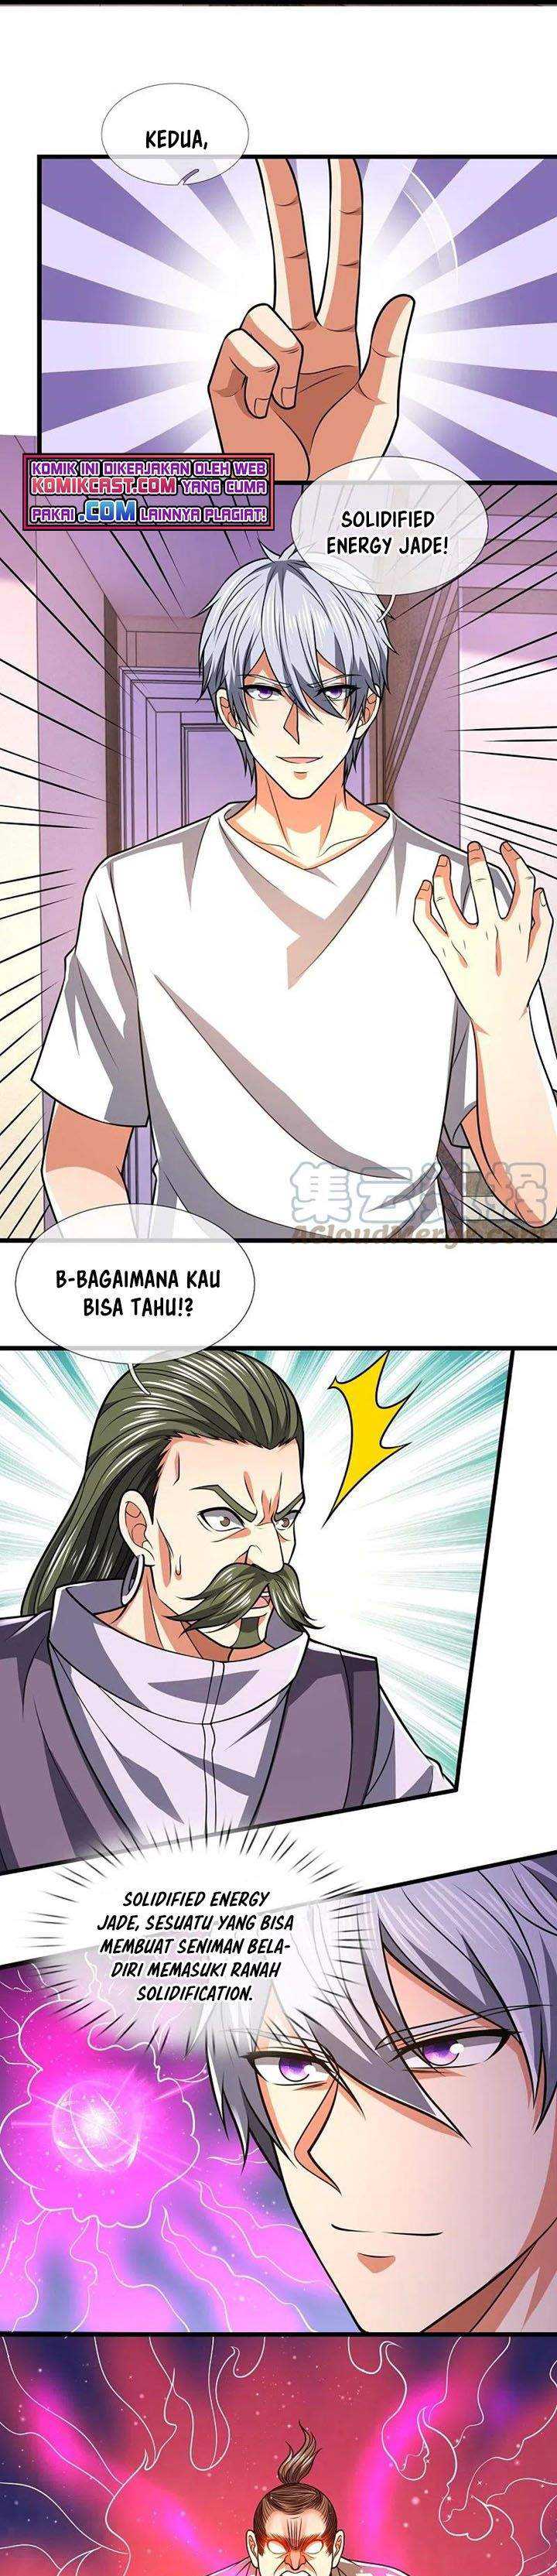 City of Heaven TimeStamp Chapter 234 bahasa indonesi